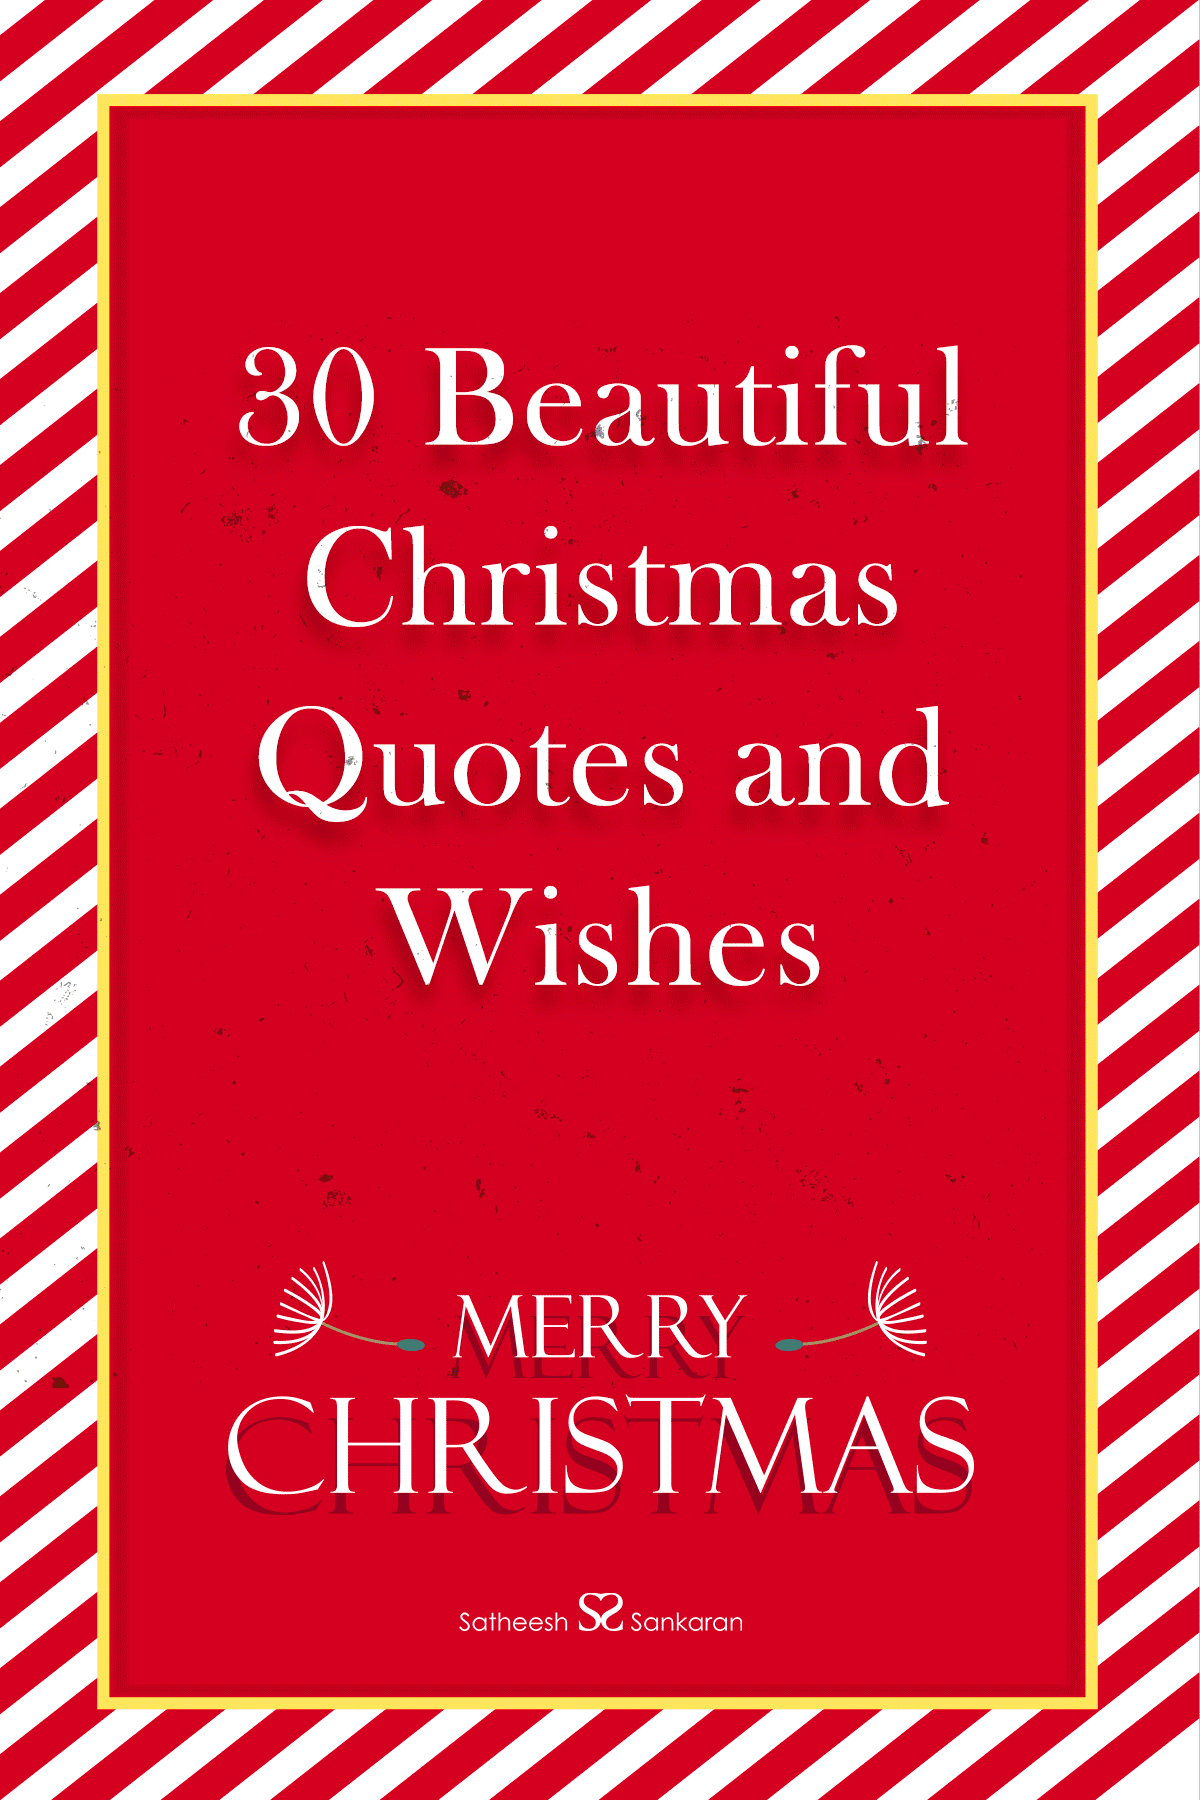 30 Beautiful Christmas Quotes and Wishes Wallpaper